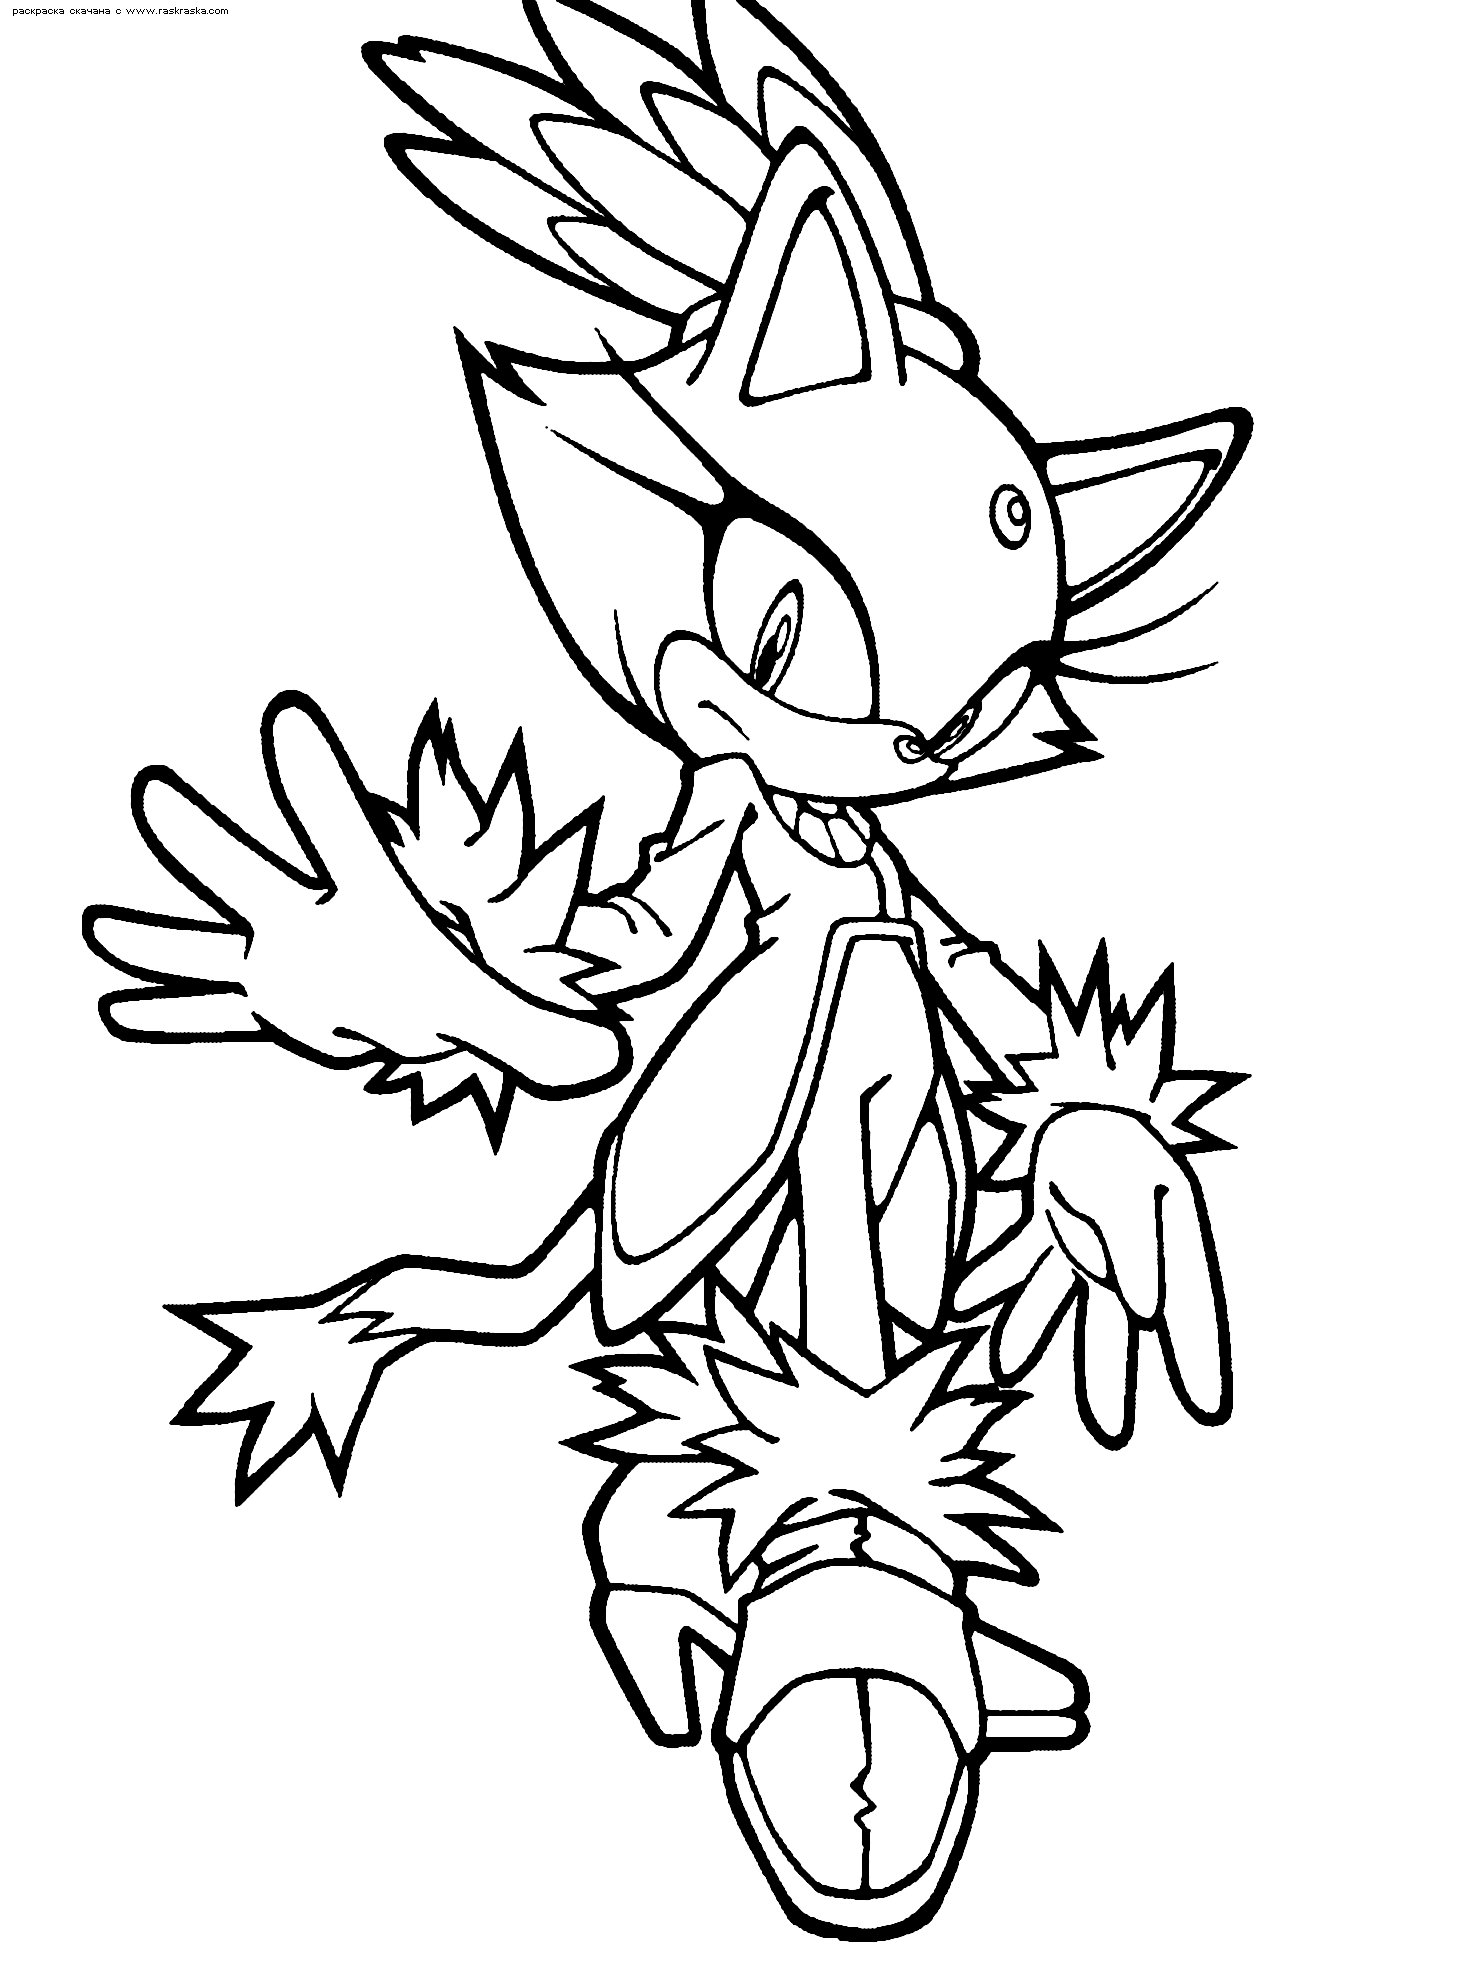 sonic the hedgehog coloring pages printable sonic coloring pages for kids cool2bkids coloring pages the sonic hedgehog 